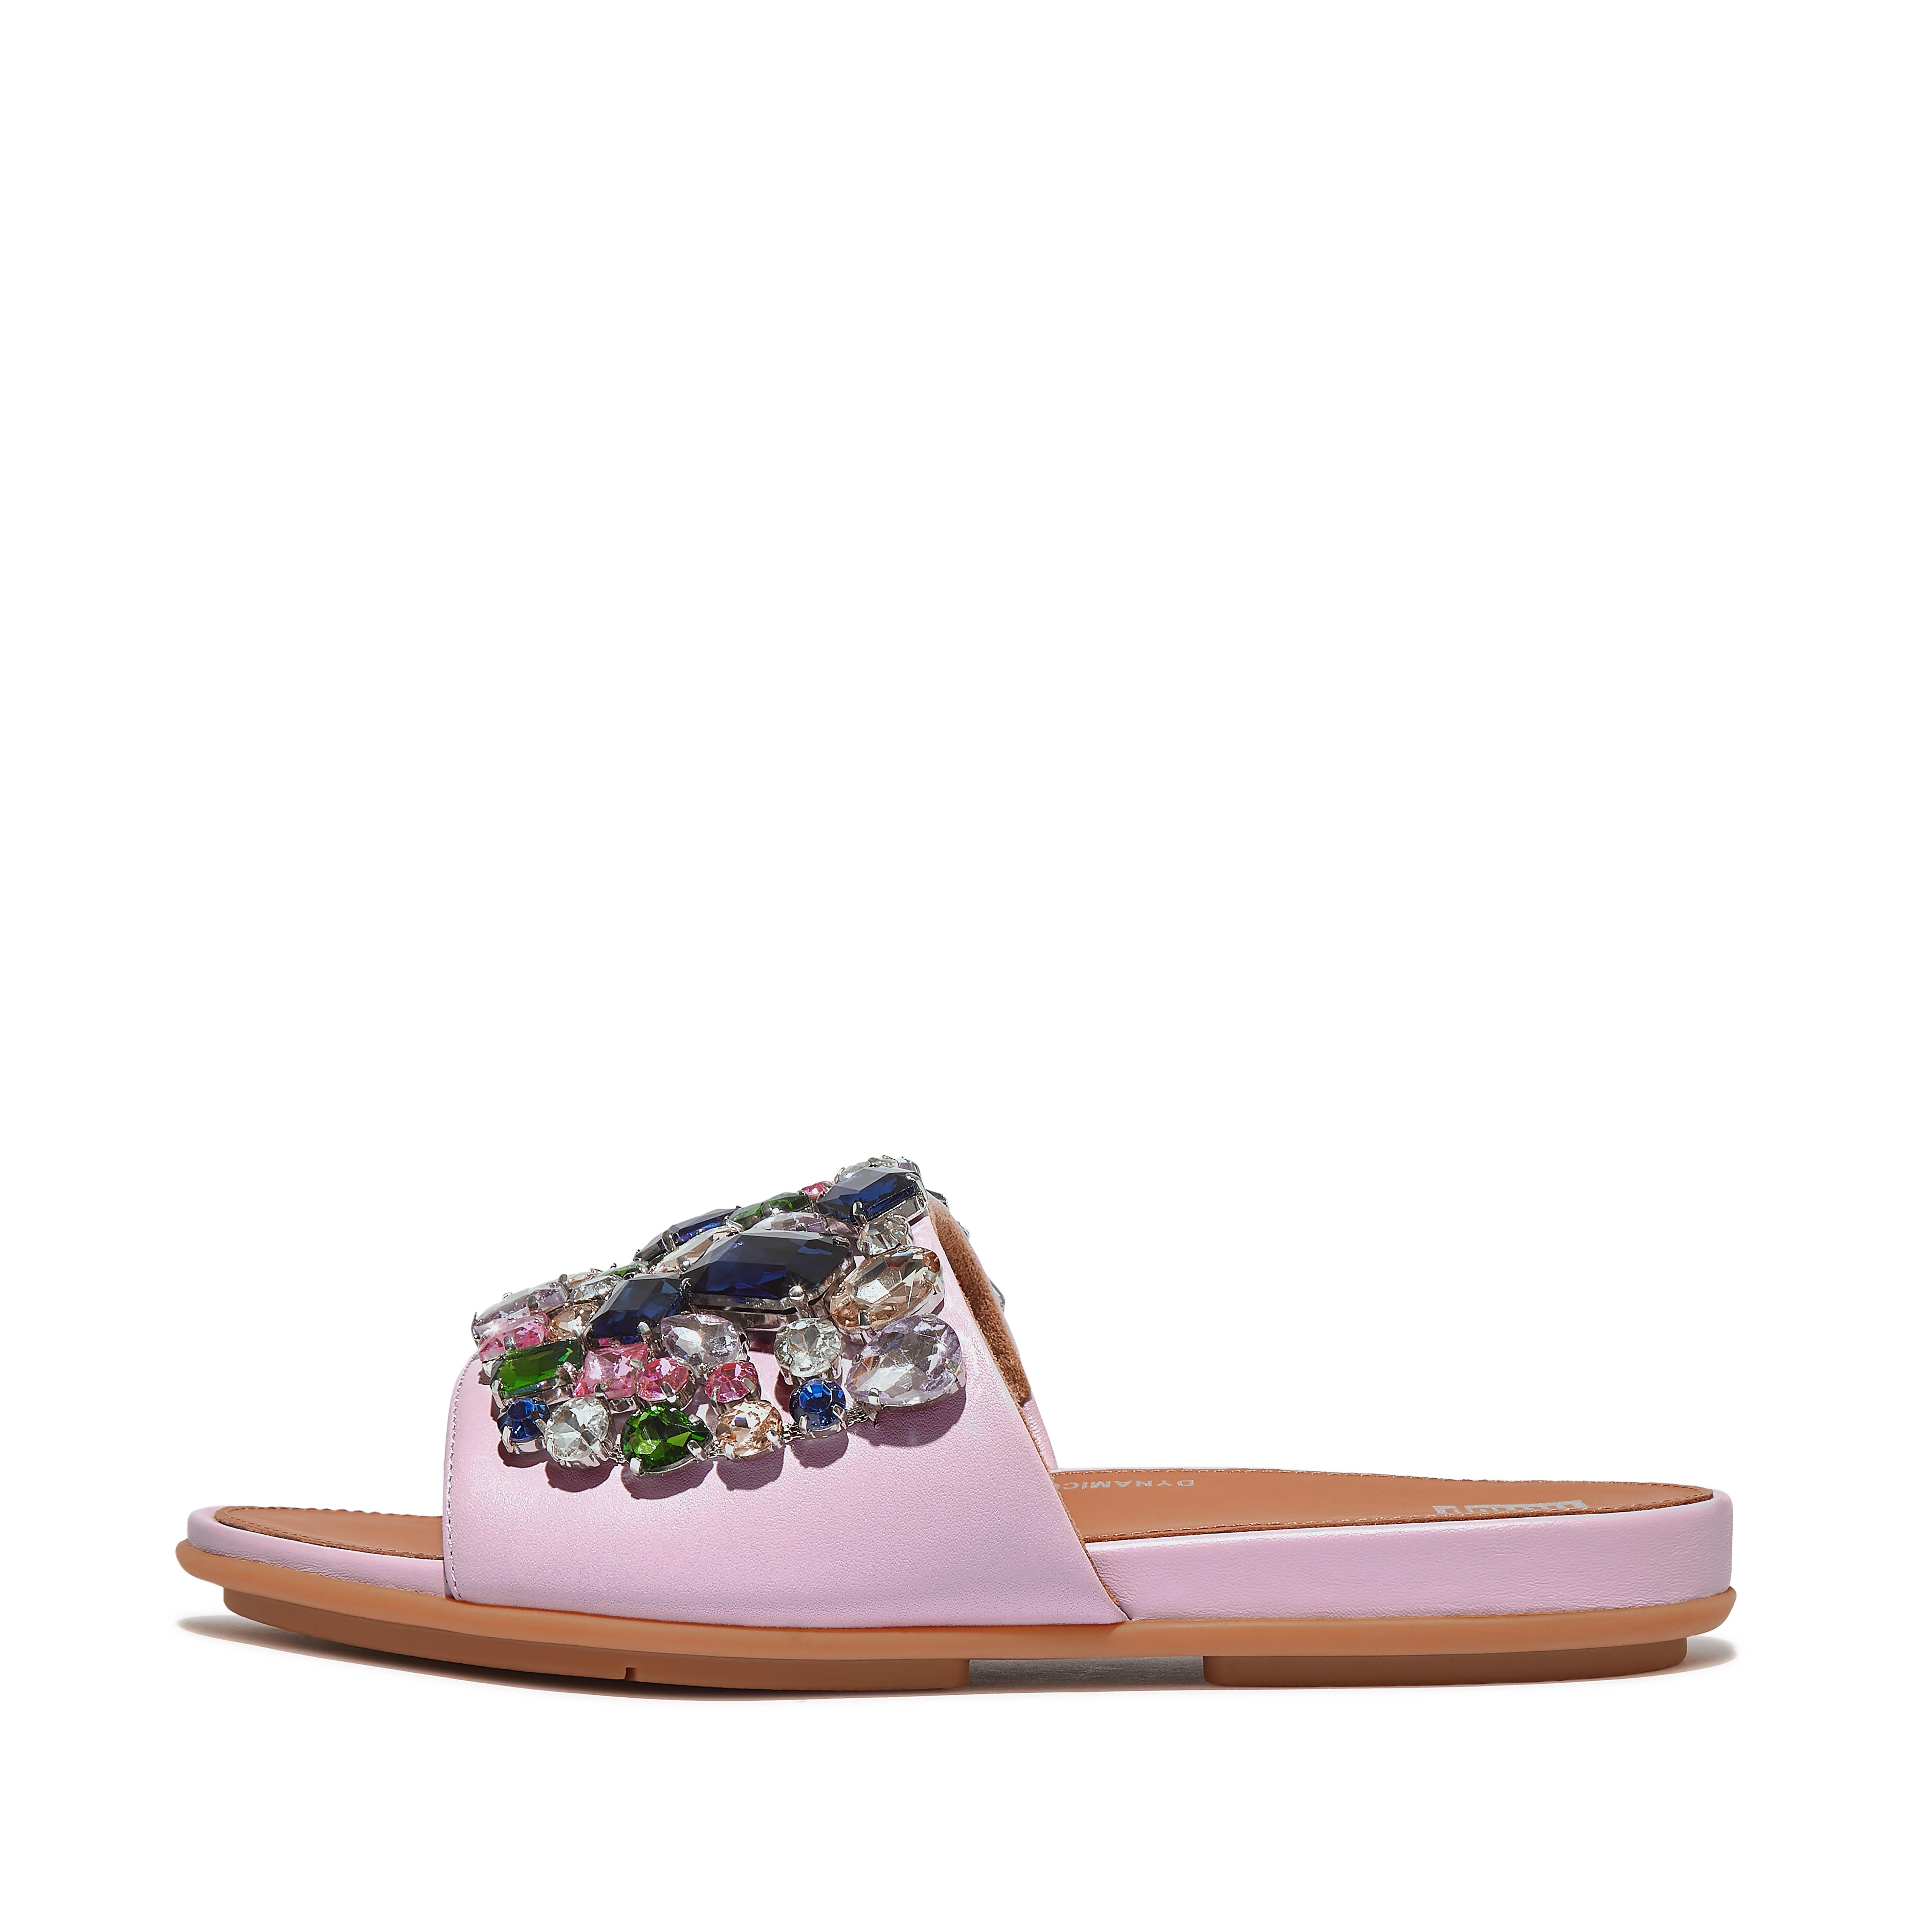 Fitflop Jewel-Deluxe Leather Slides,wild lilac